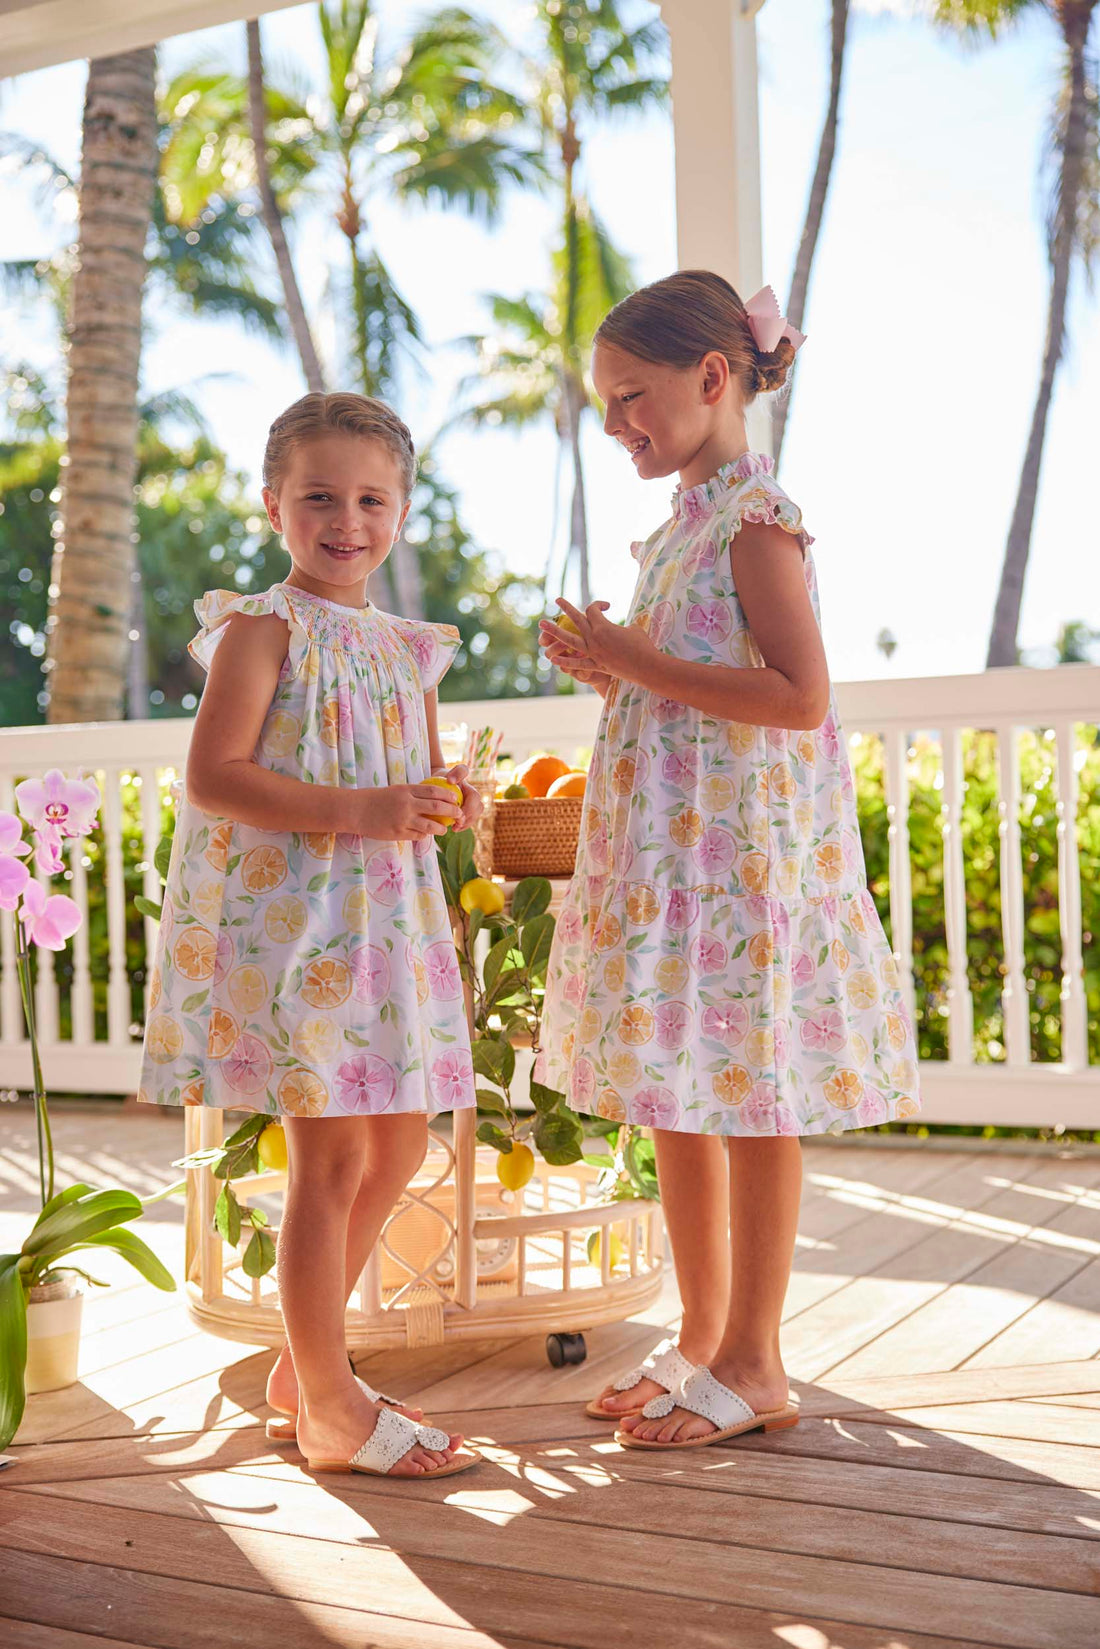 classic childrens clothing girls dress with ruffled collar and sleeves in citrus print